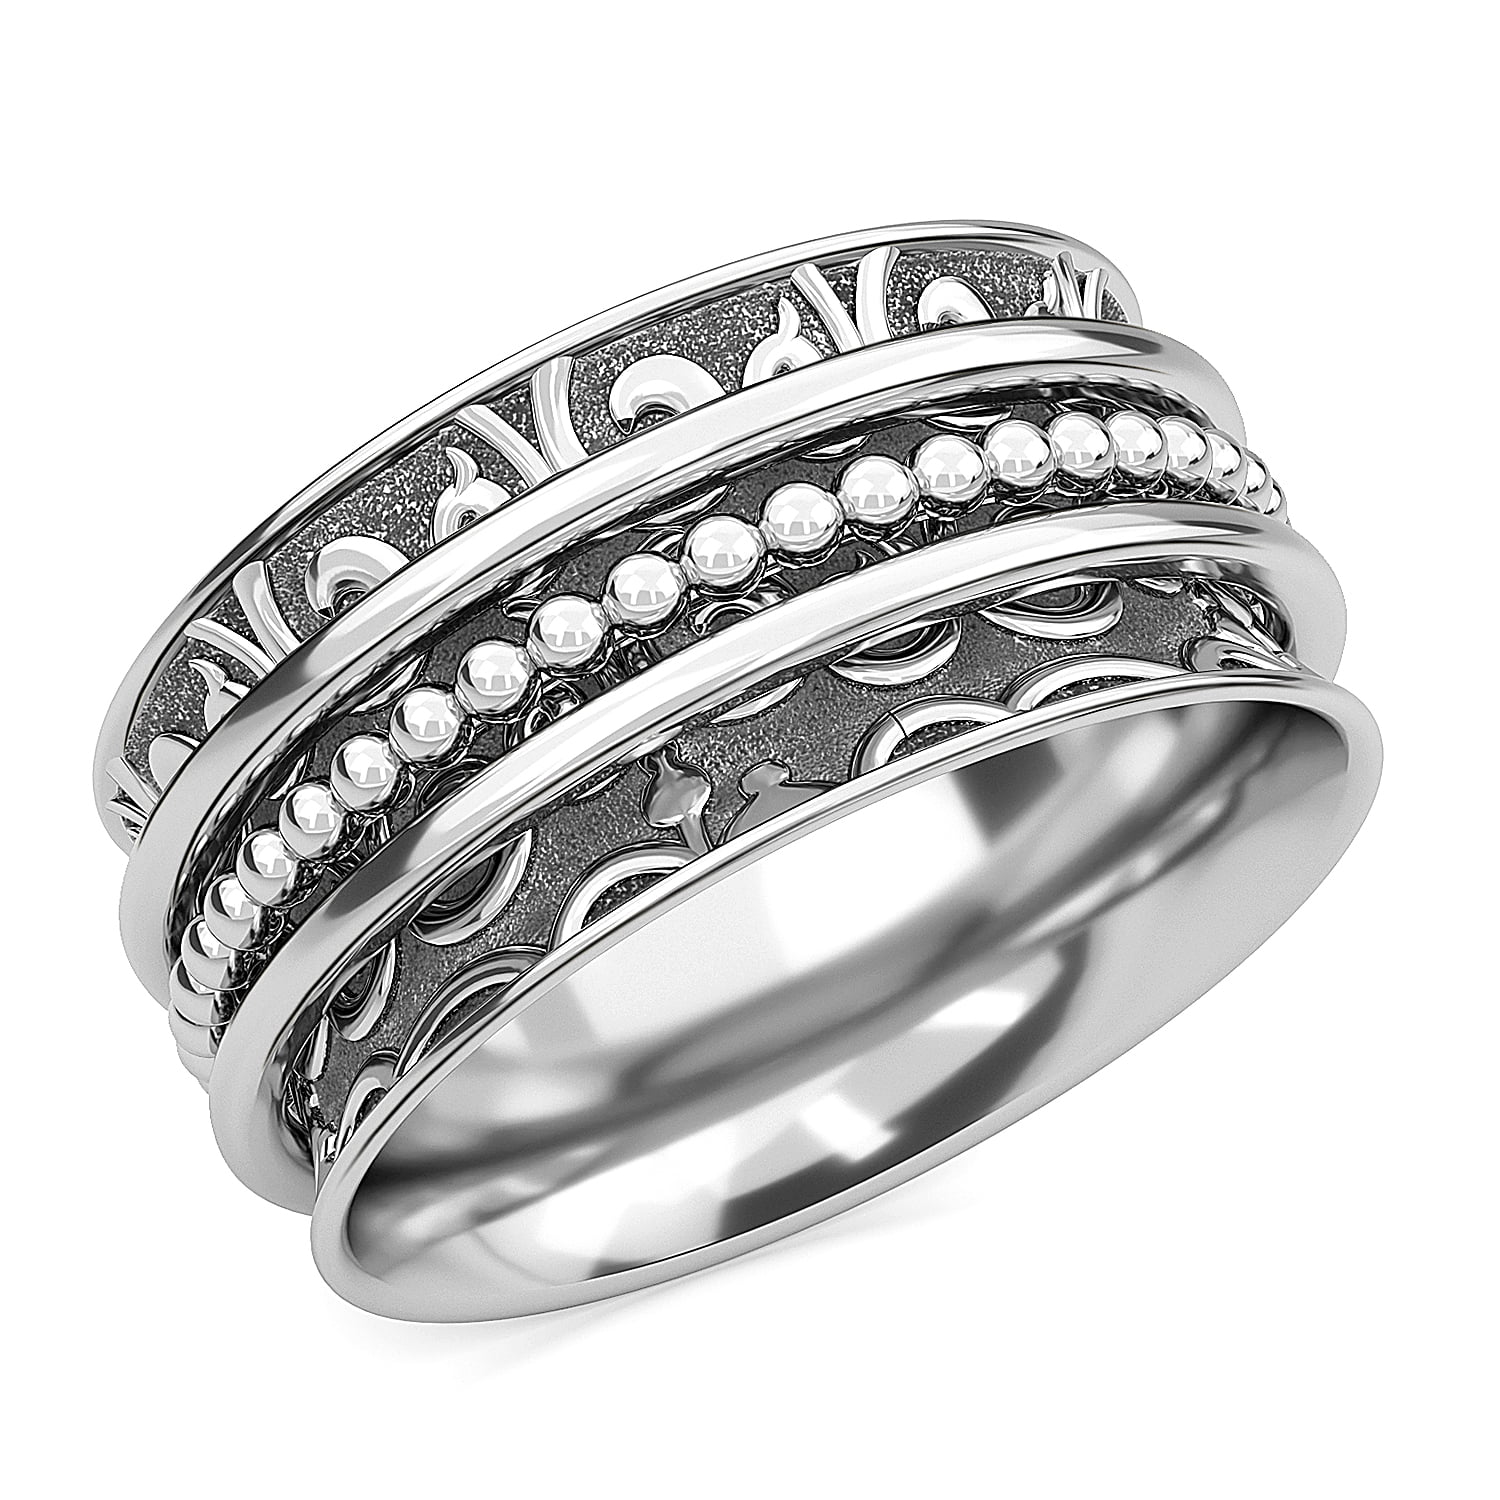 Filigree Bali Band Wave .925 Sterling Silver Ring Sizes 4-13